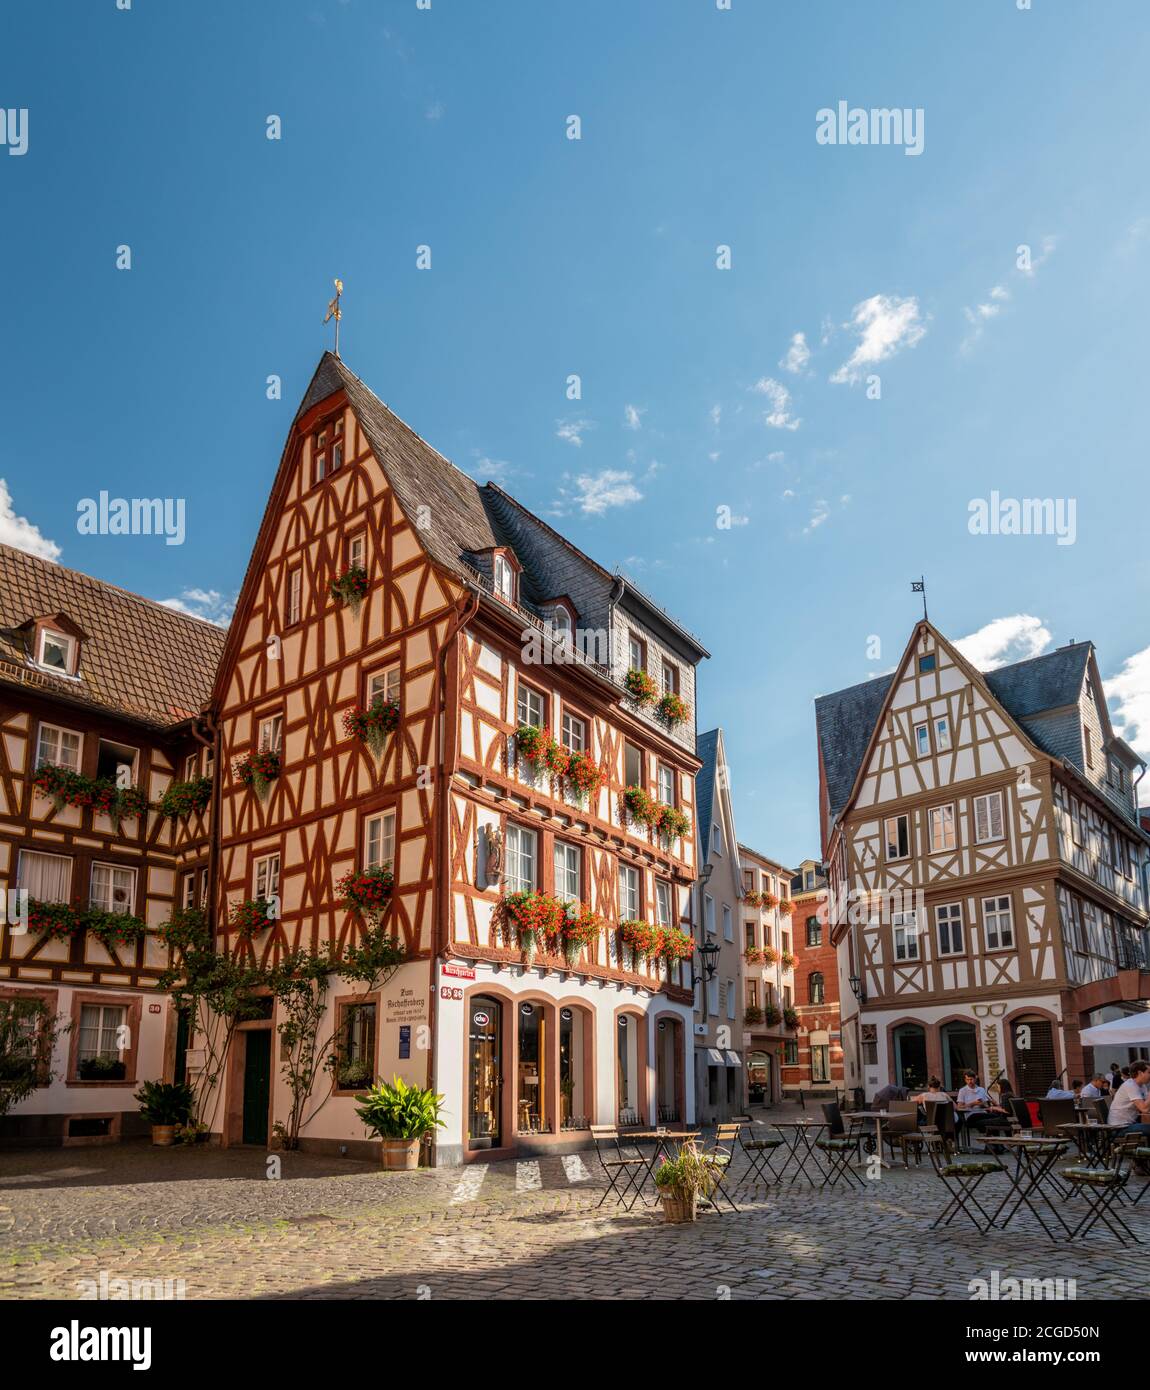 Mainz Germany August 2020, Classical timber houses in the center of Mainz, Germany Stock Photo